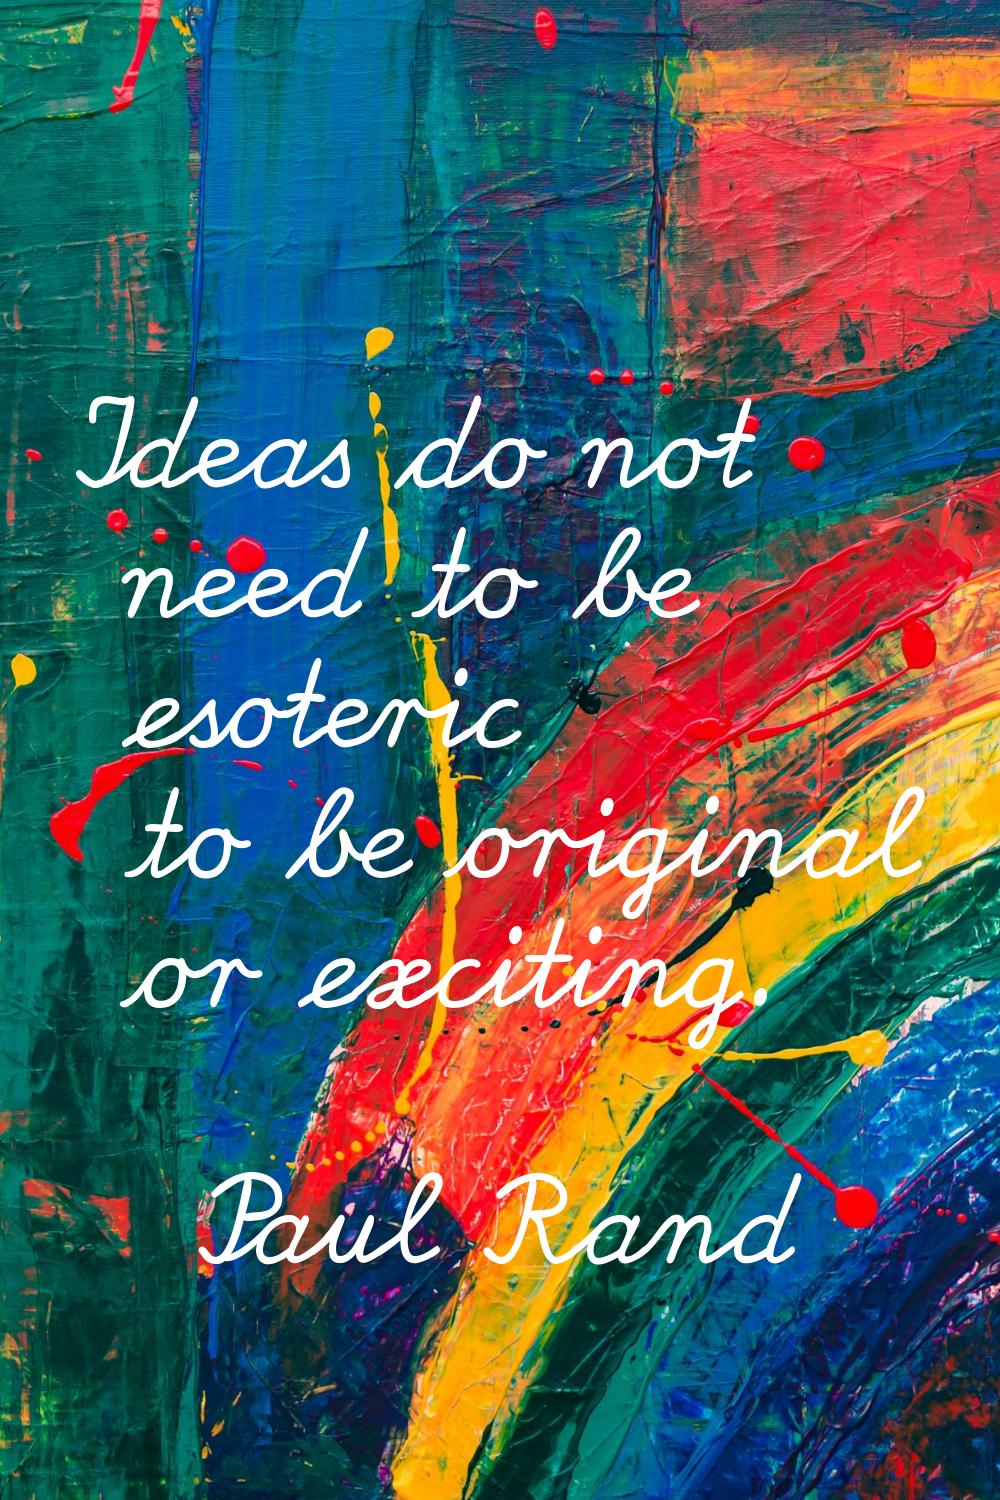 Ideas do not need to be esoteric to be original or exciting.